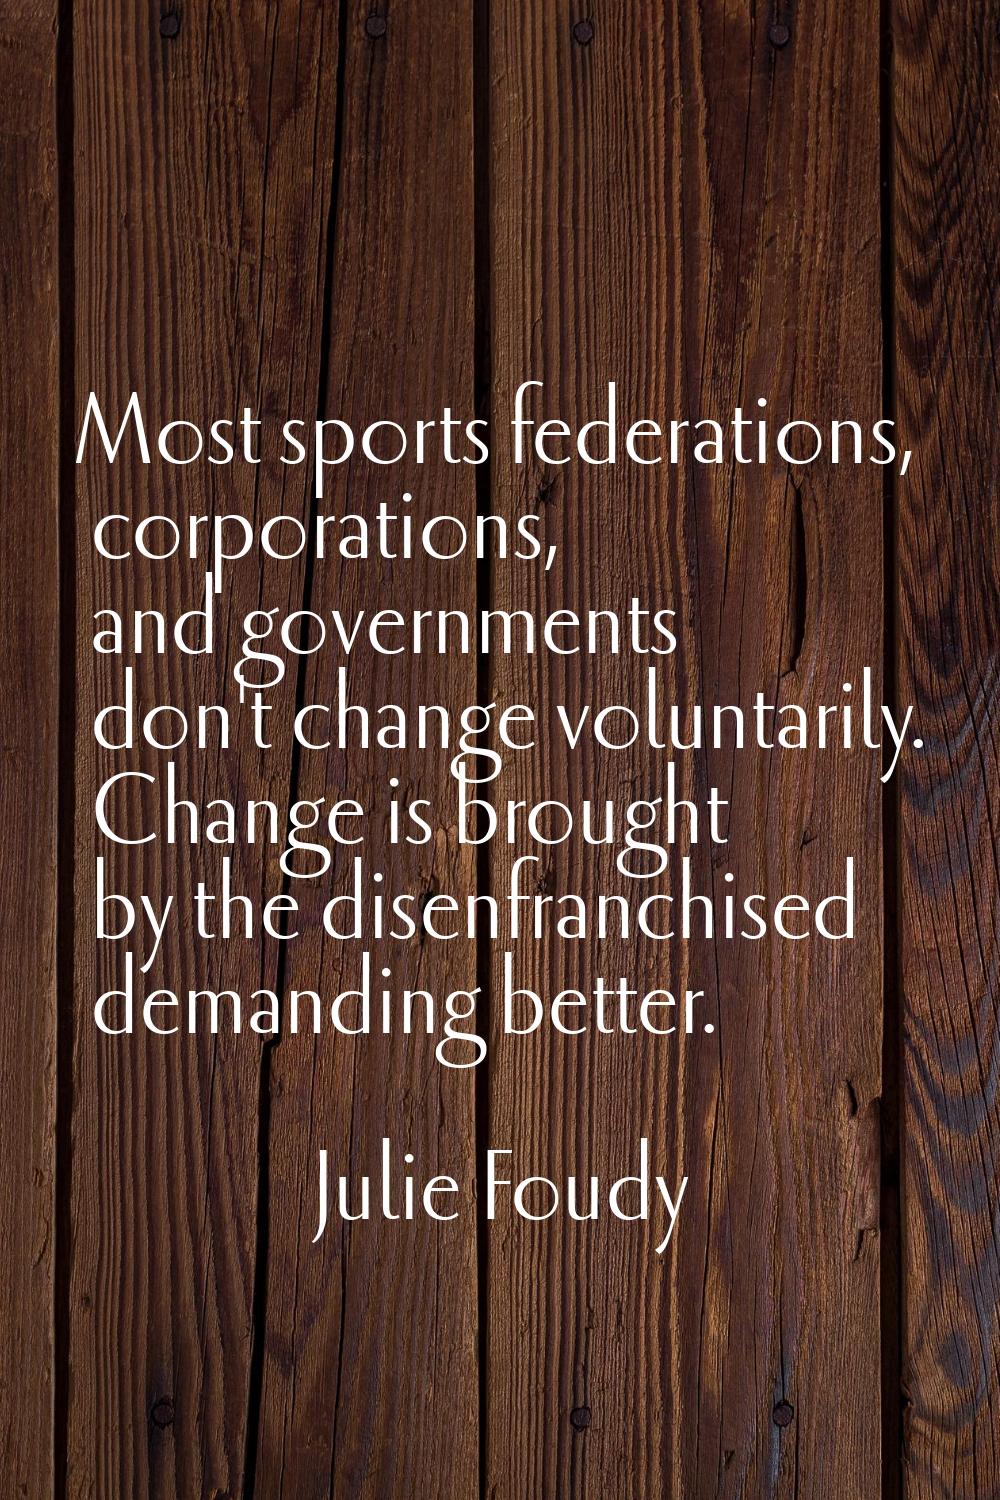 Most sports federations, corporations, and governments don't change voluntarily. Change is brought 